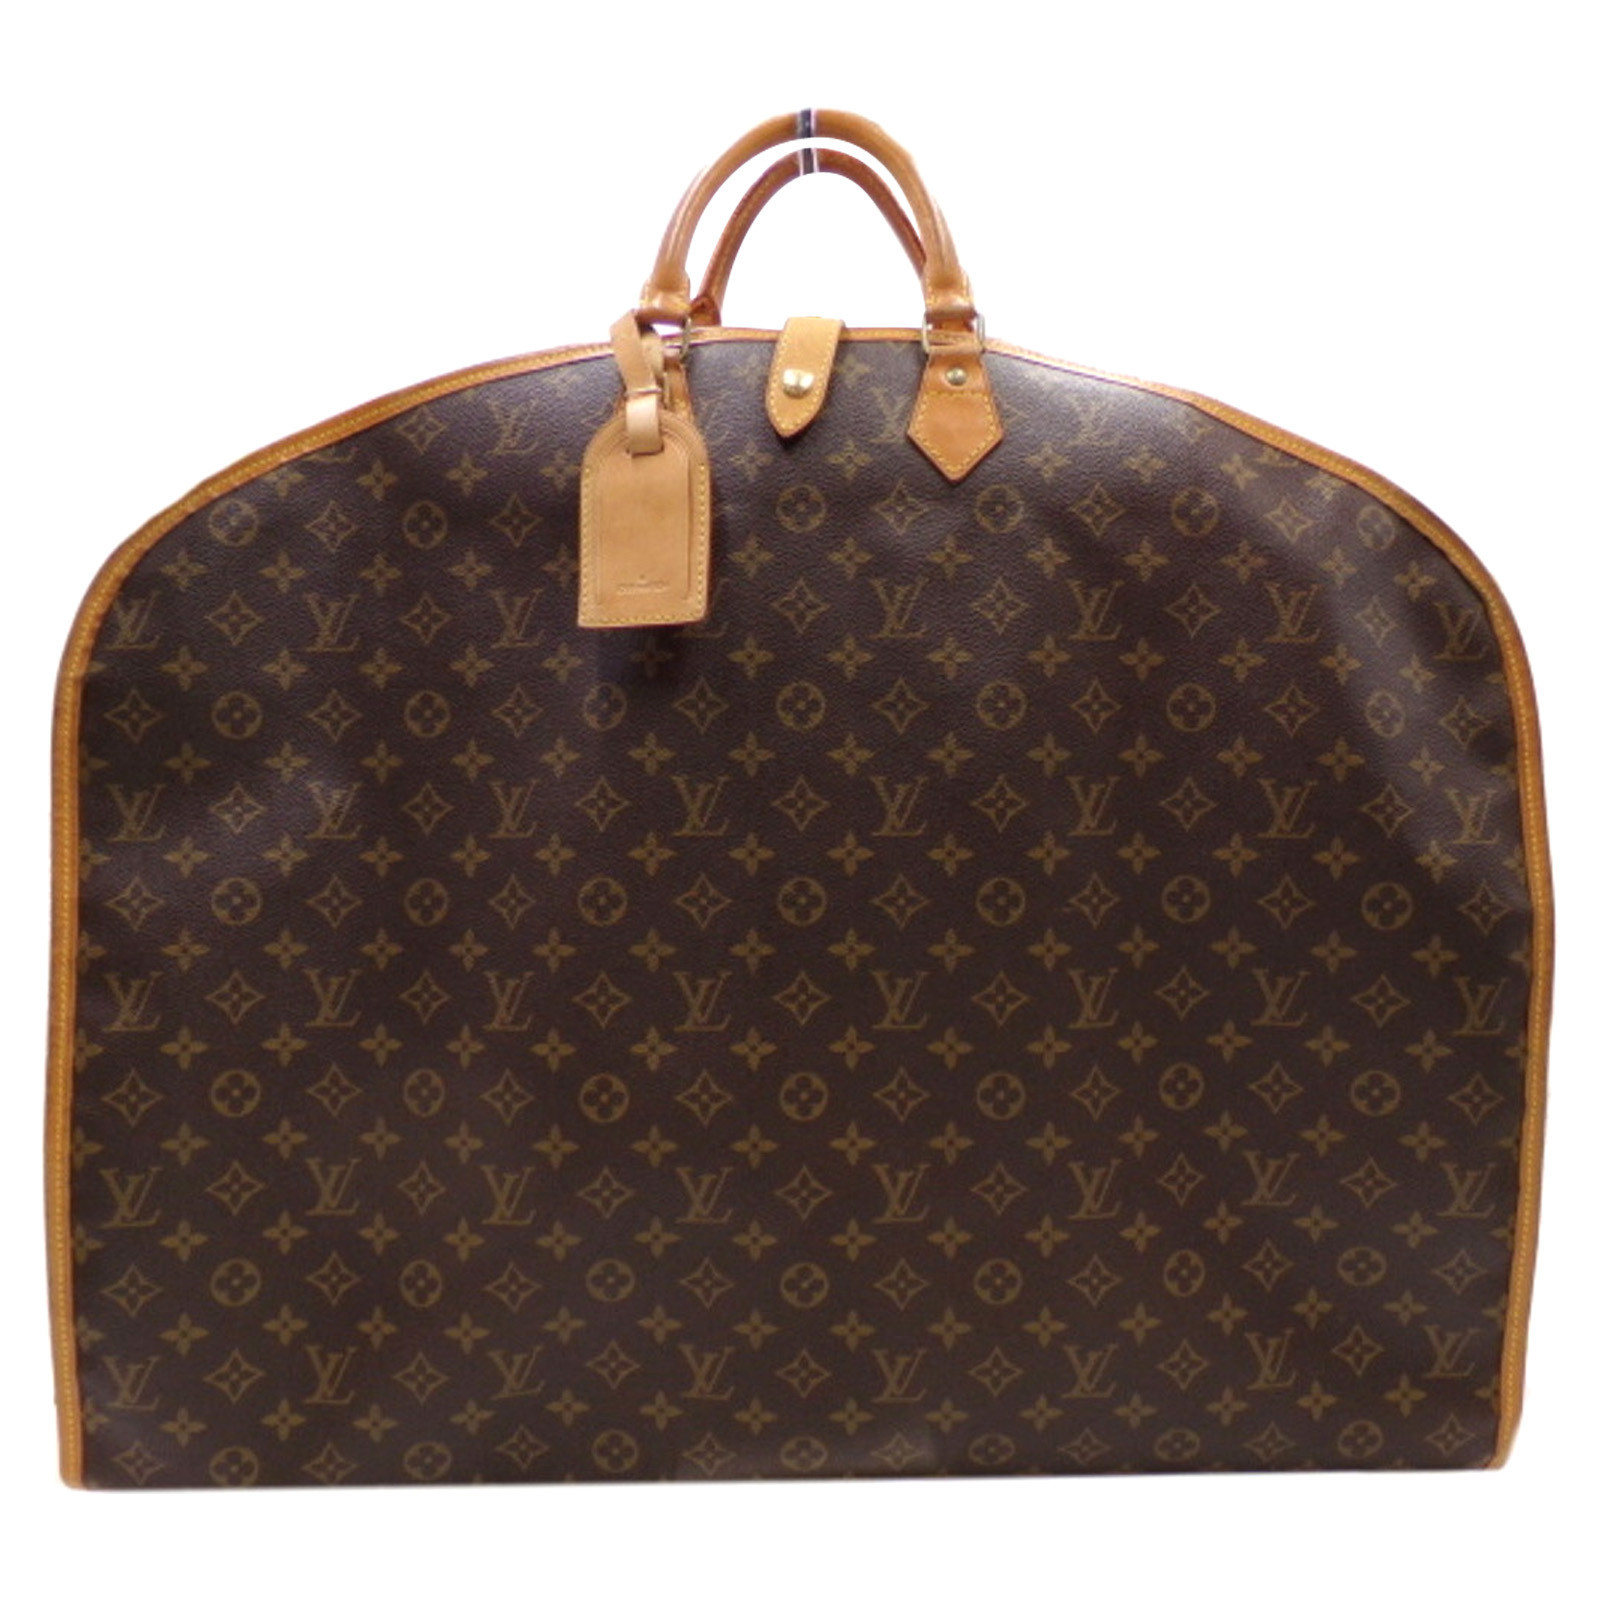 Louis Vuitton Travel bag Canvas in Brown - Second Hand Louis Vuitton Travel  bag Canvas in Brown buy used for 1350€ (7811777)